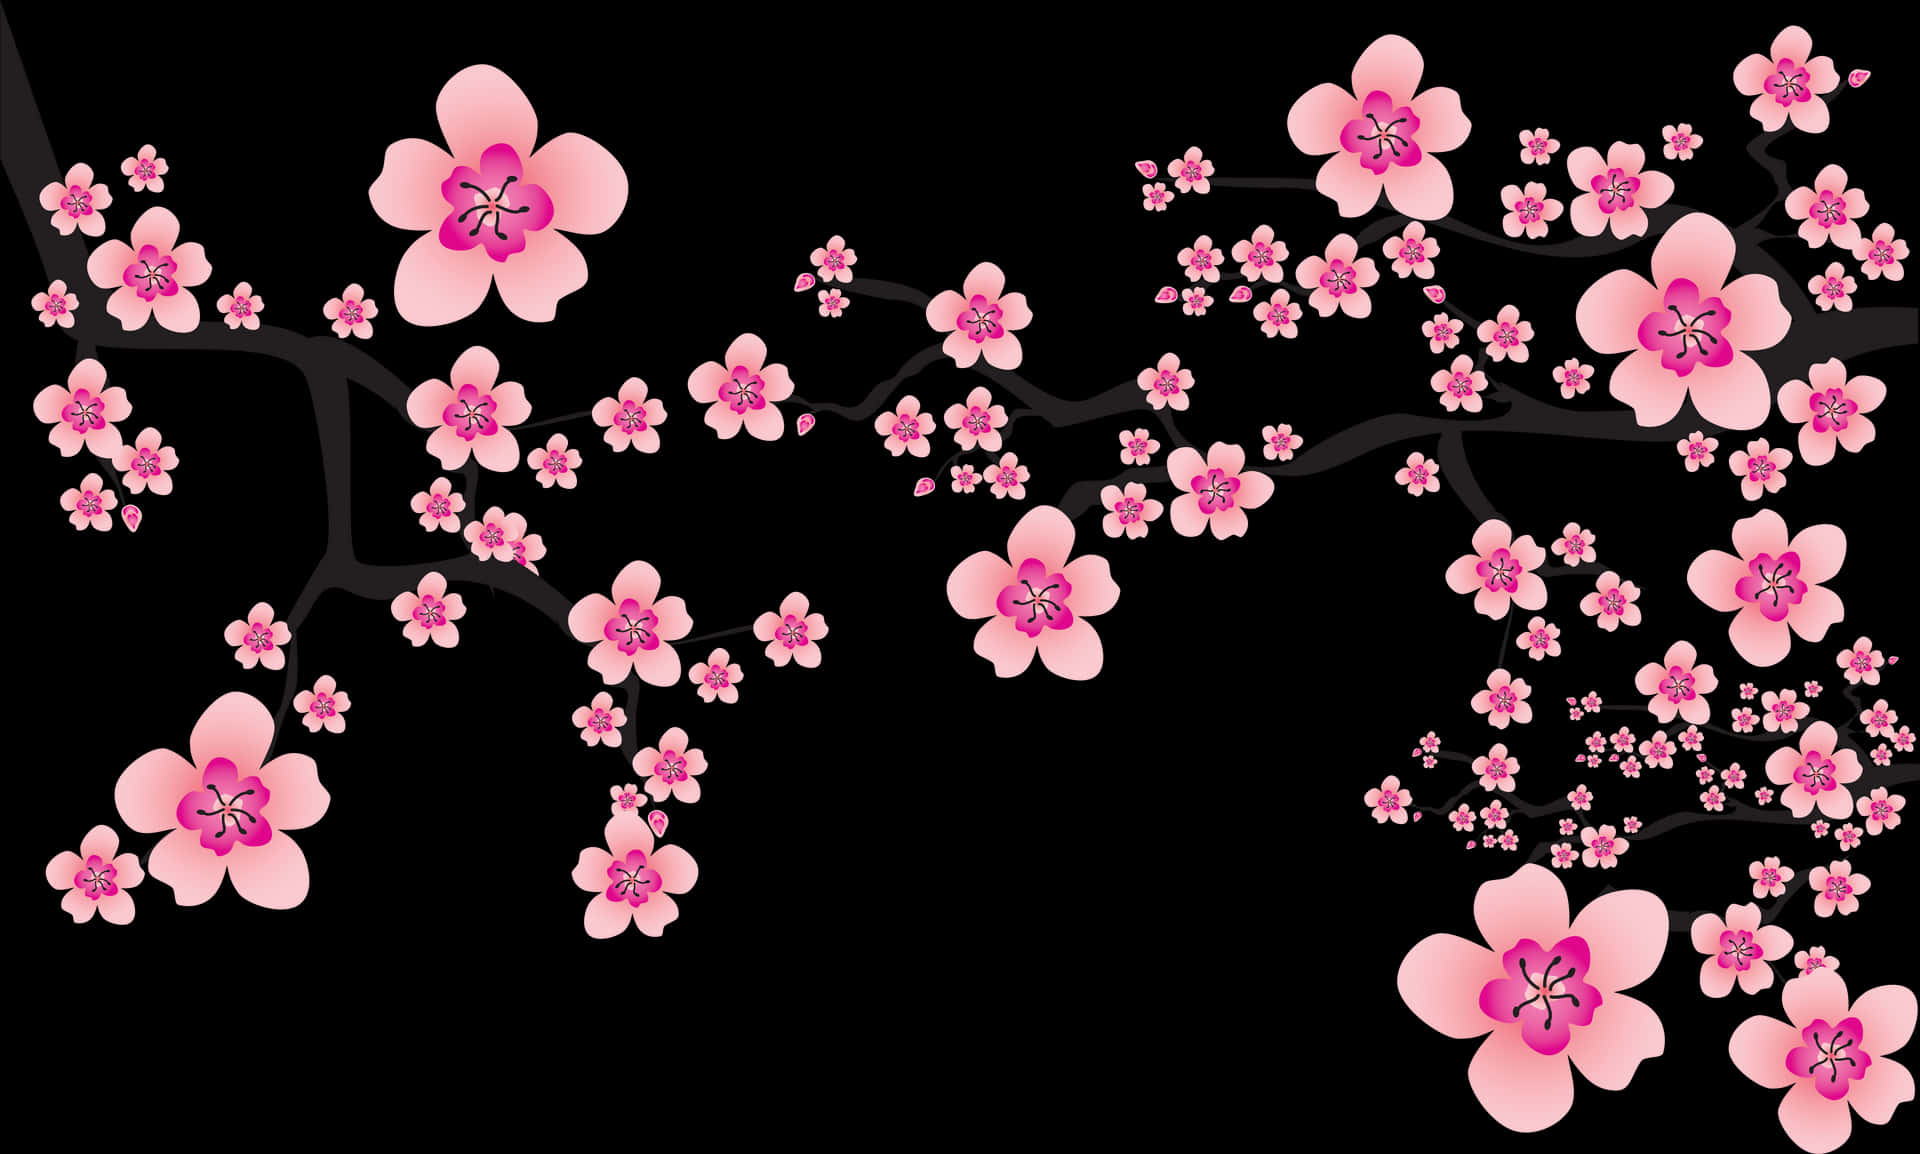 Abstract Cherry Blossomson Black Background PNG image